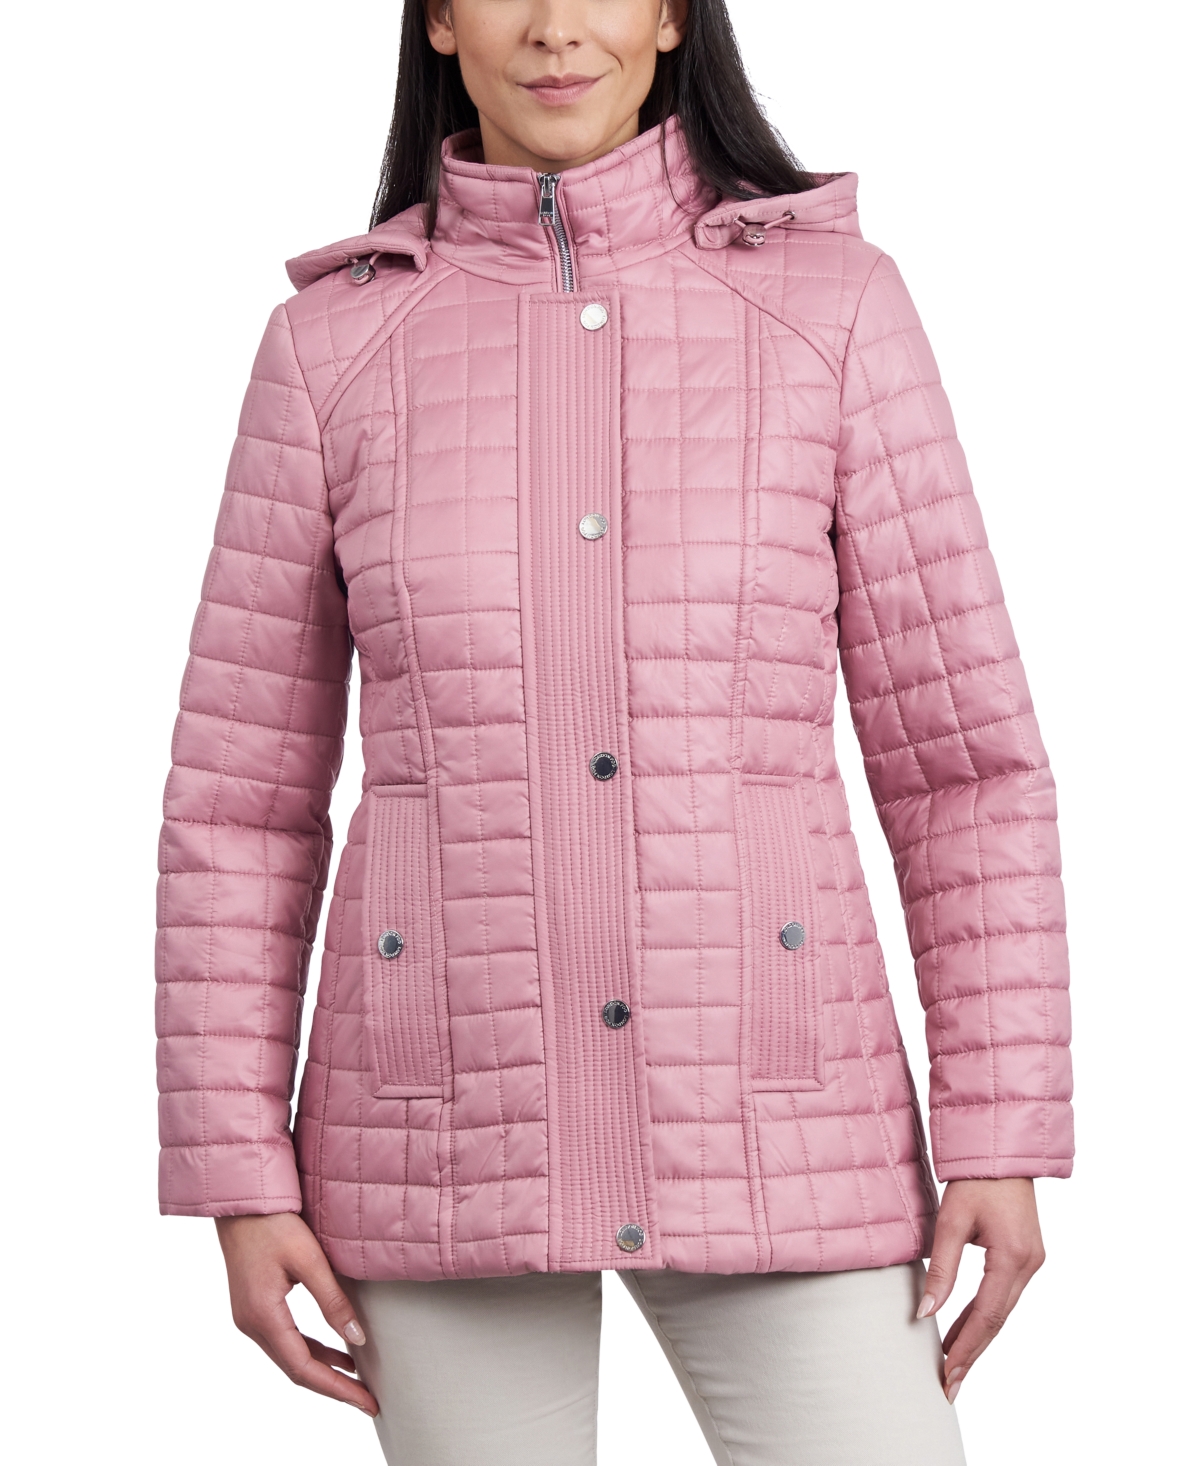 Women's Hooded Quilted Water-Resistant Coat - Lavender